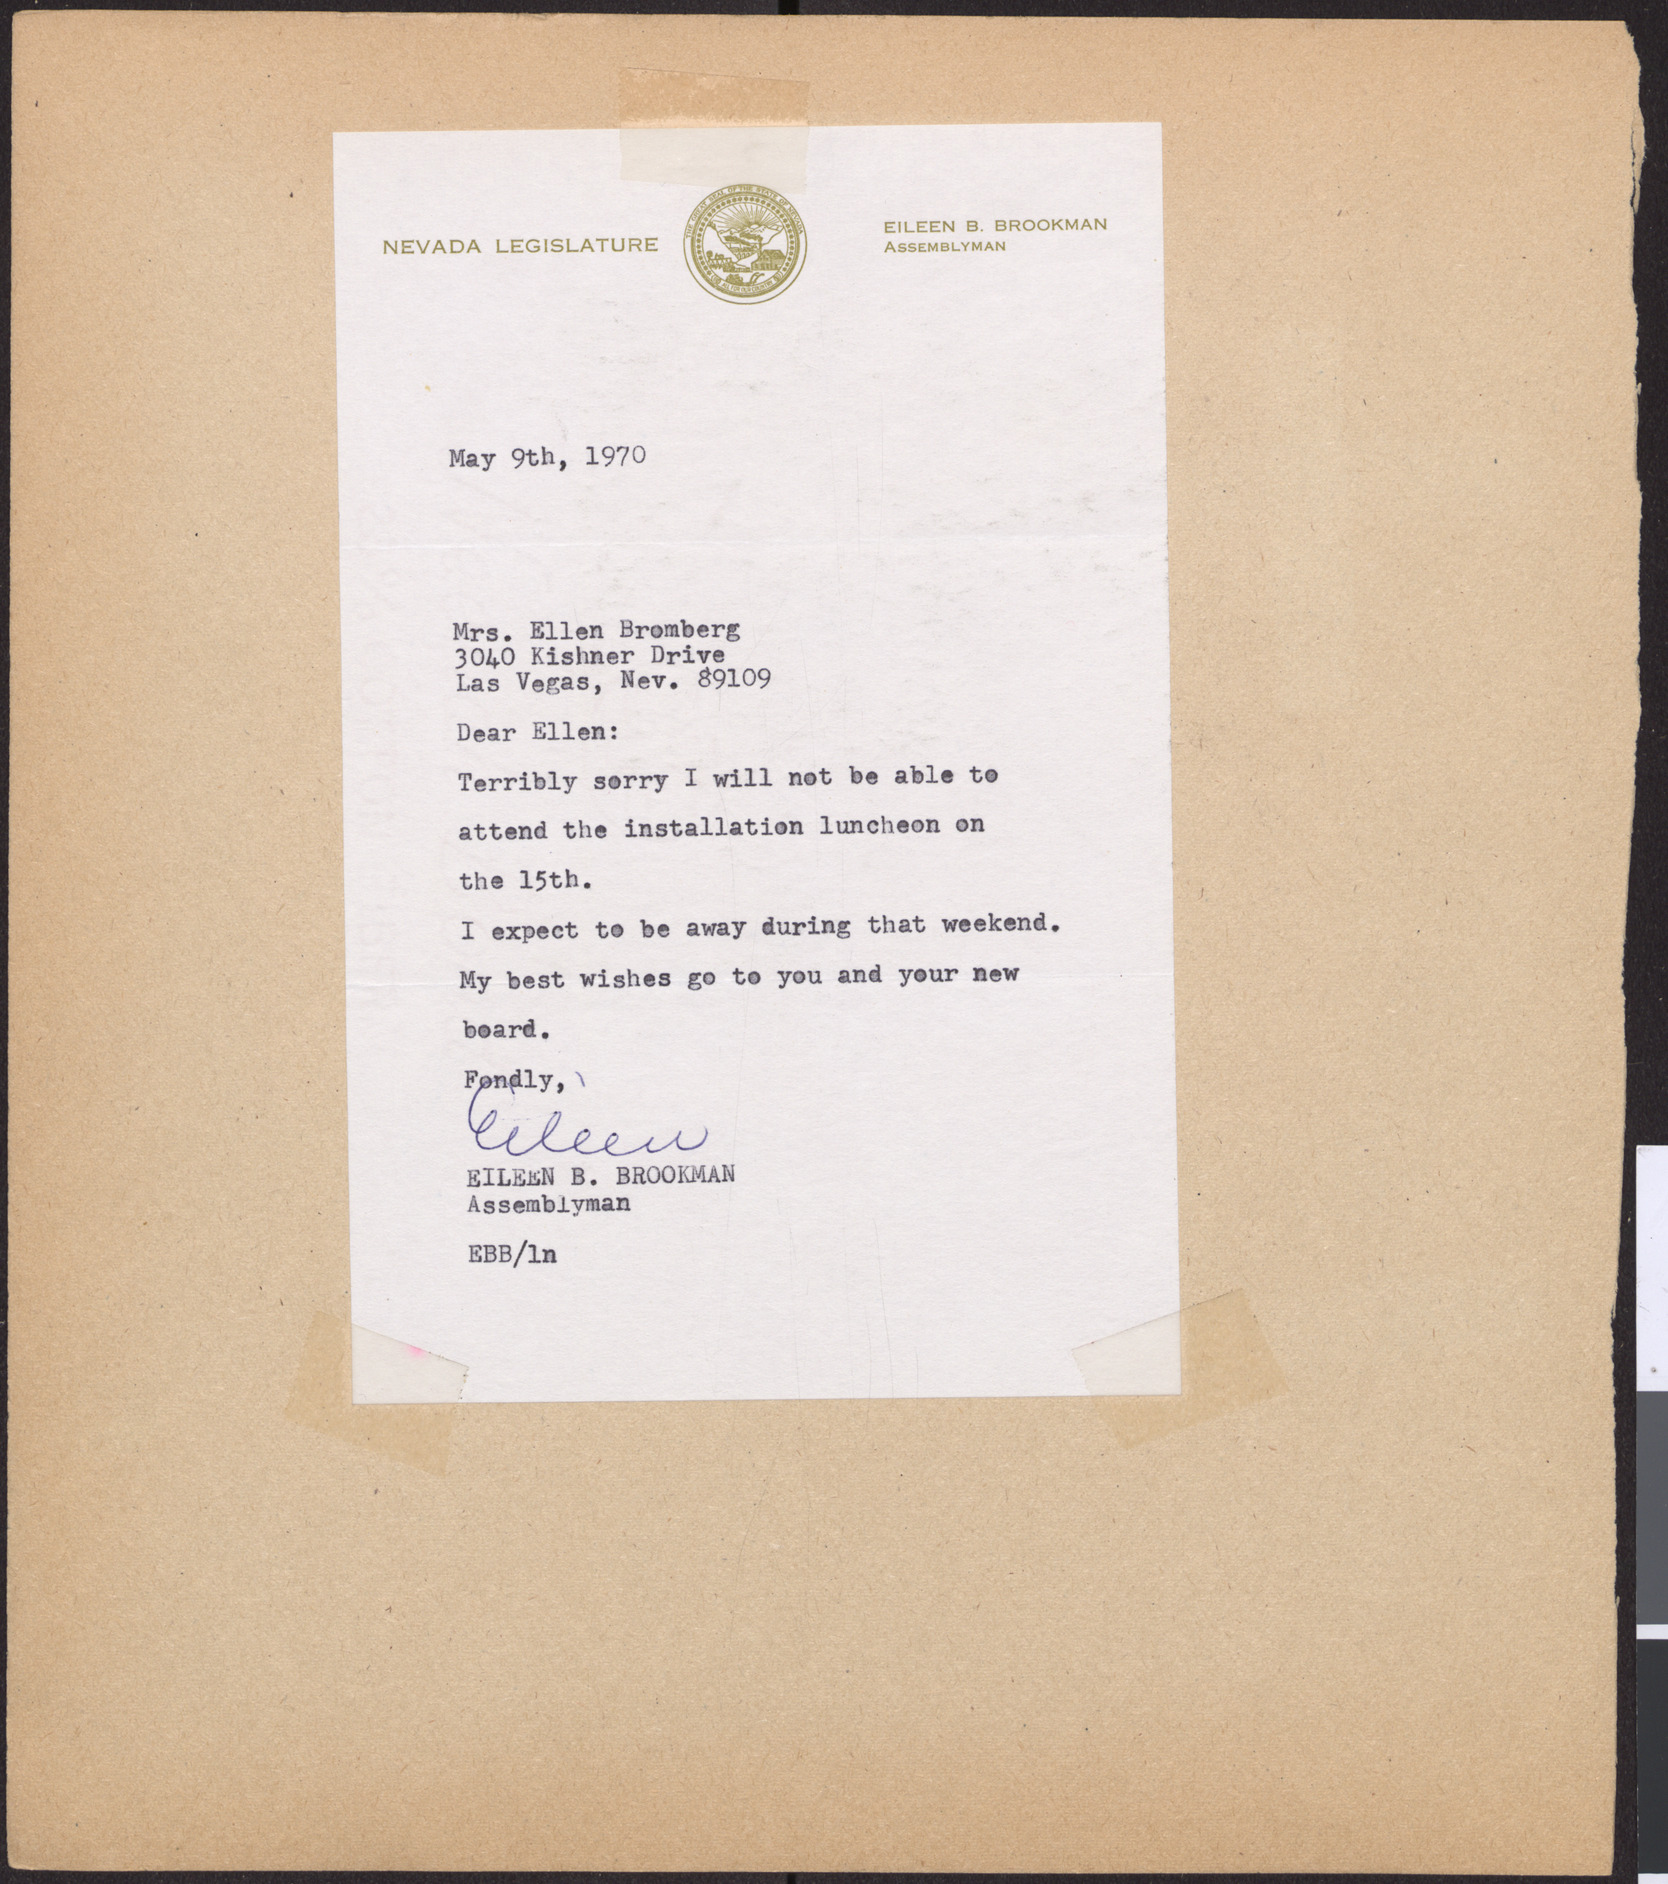 Letter from Eileen Brookman (Carson City, Nev.) to Ellen Bromberg (Las Vegas, Nev.), May 9, 1970